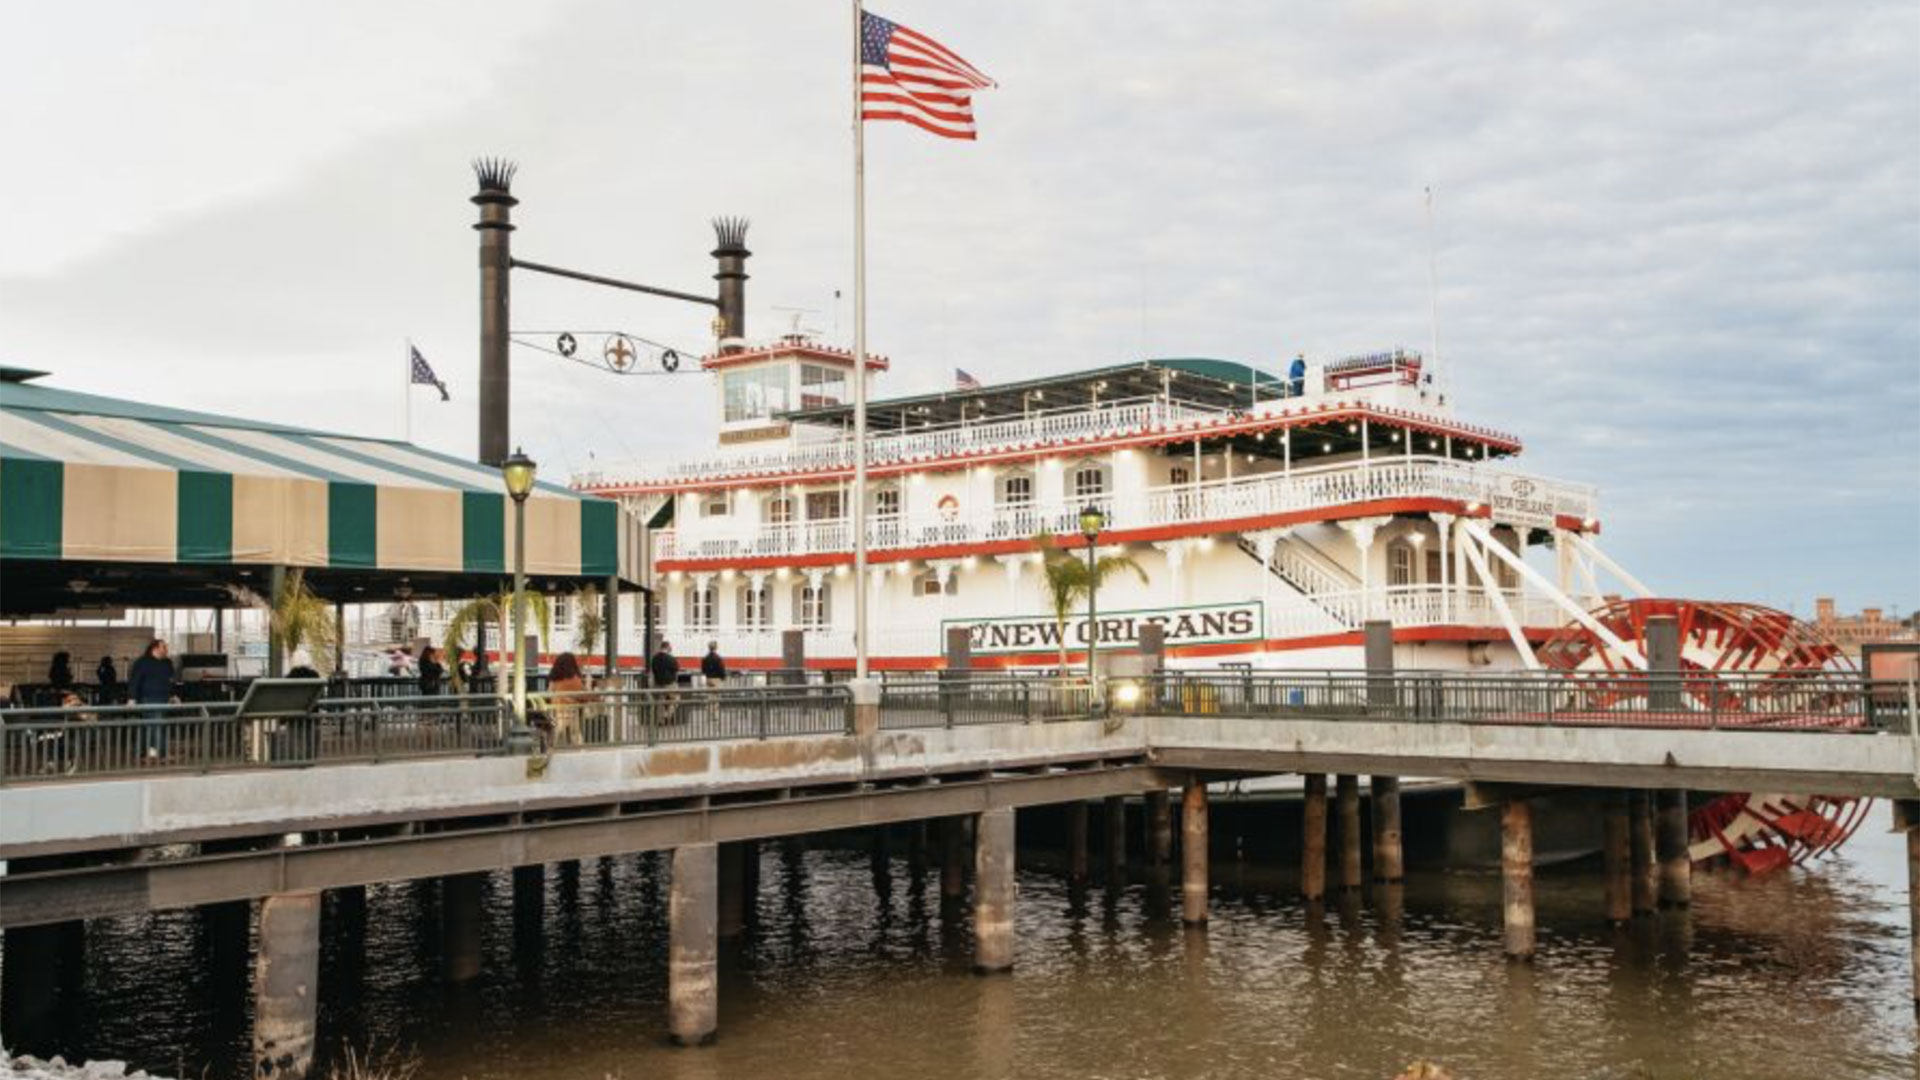 Evening Jazz Cruise on the Steamboat Natchez in New Orleans 02